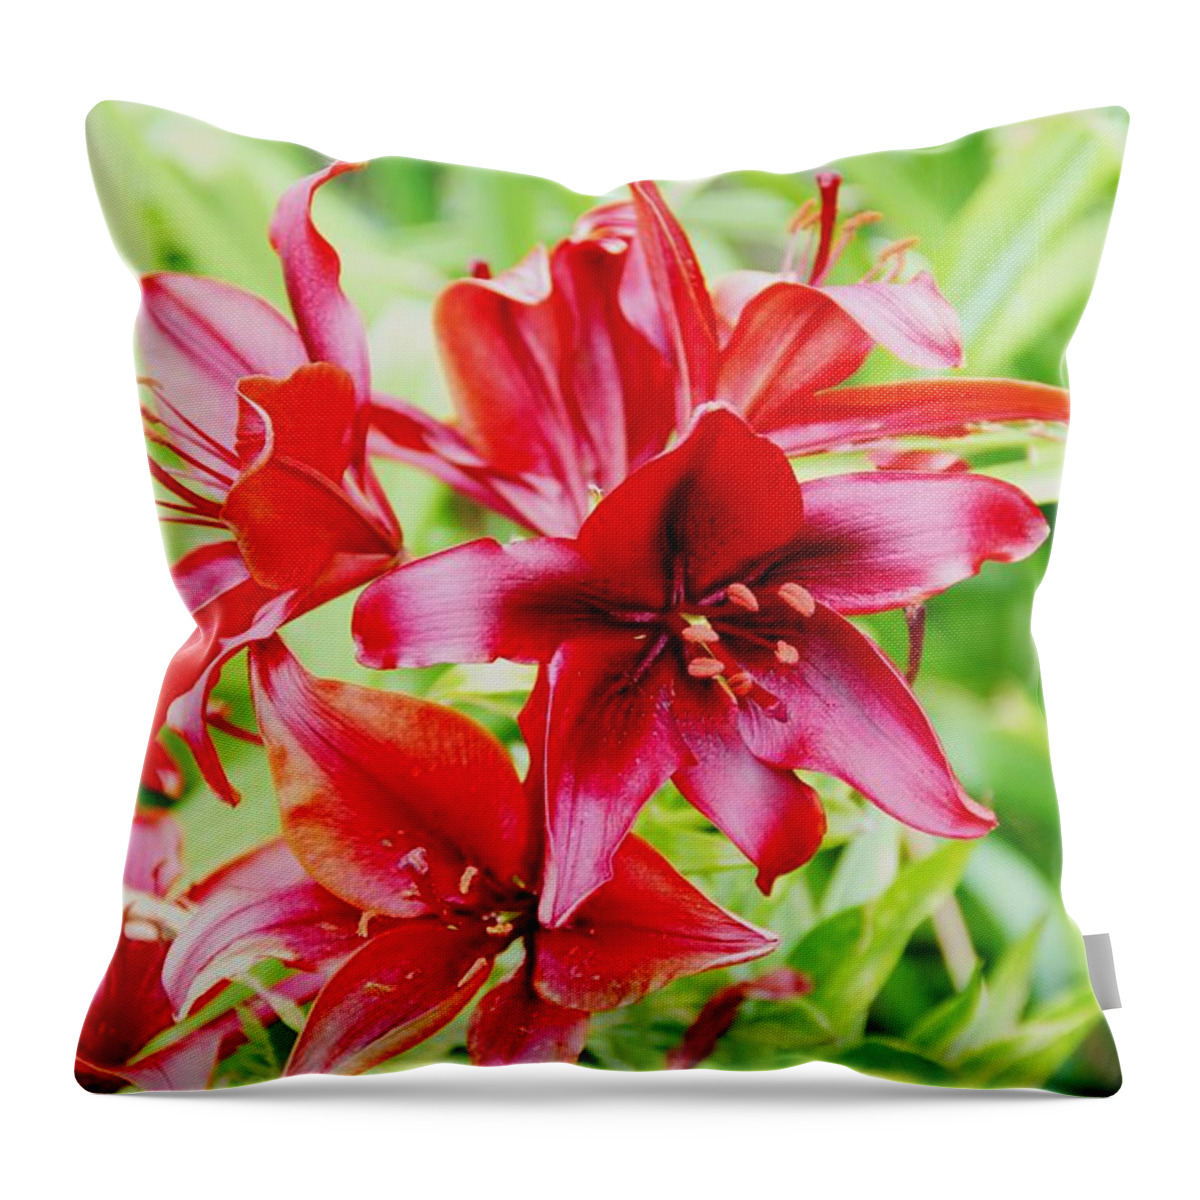 Flowers Throw Pillow featuring the photograph Crimson Lilies by Charlene Reinauer